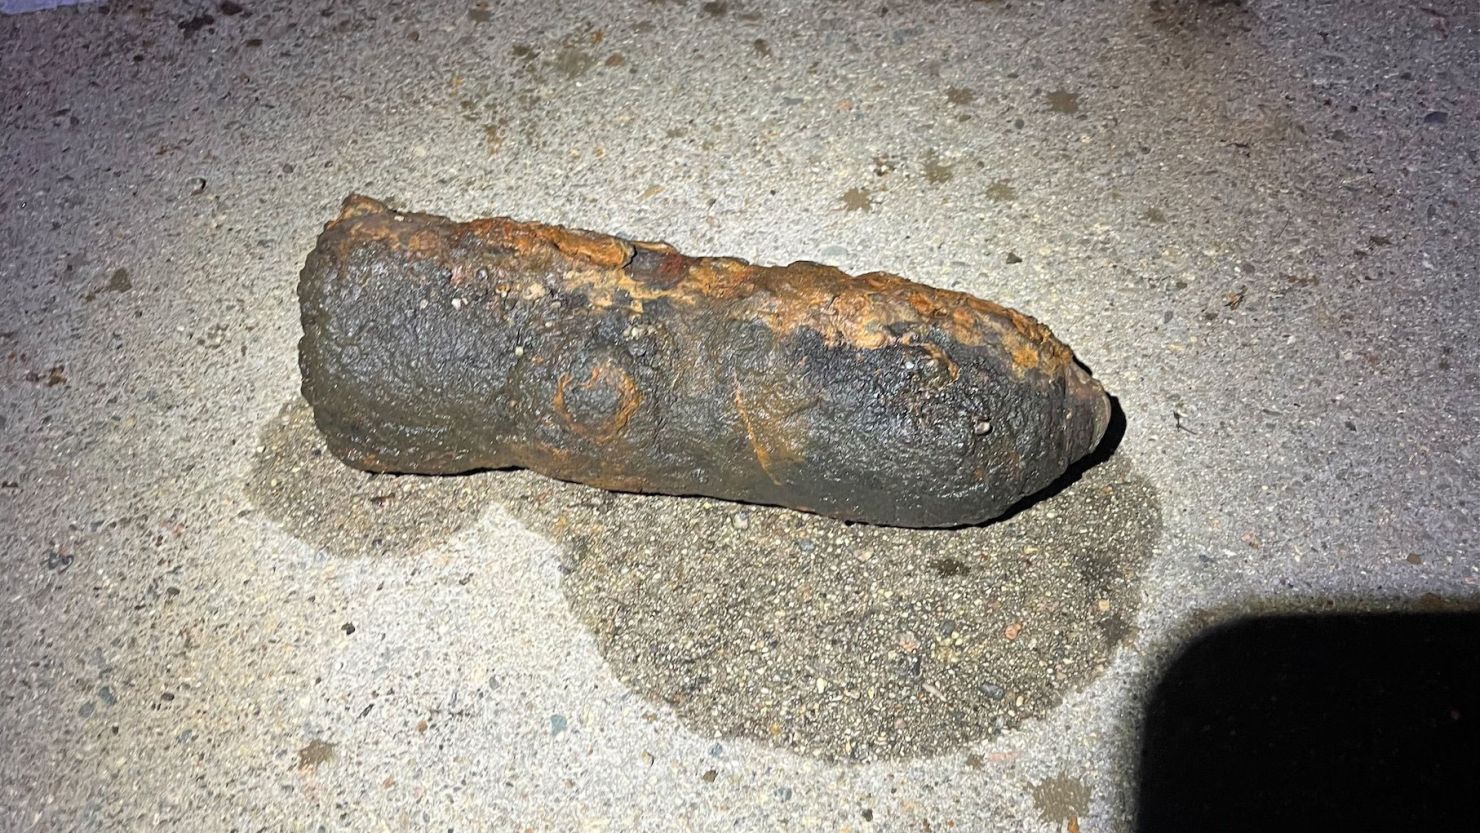 Military projectile pulled from water by Massachusetts magnet